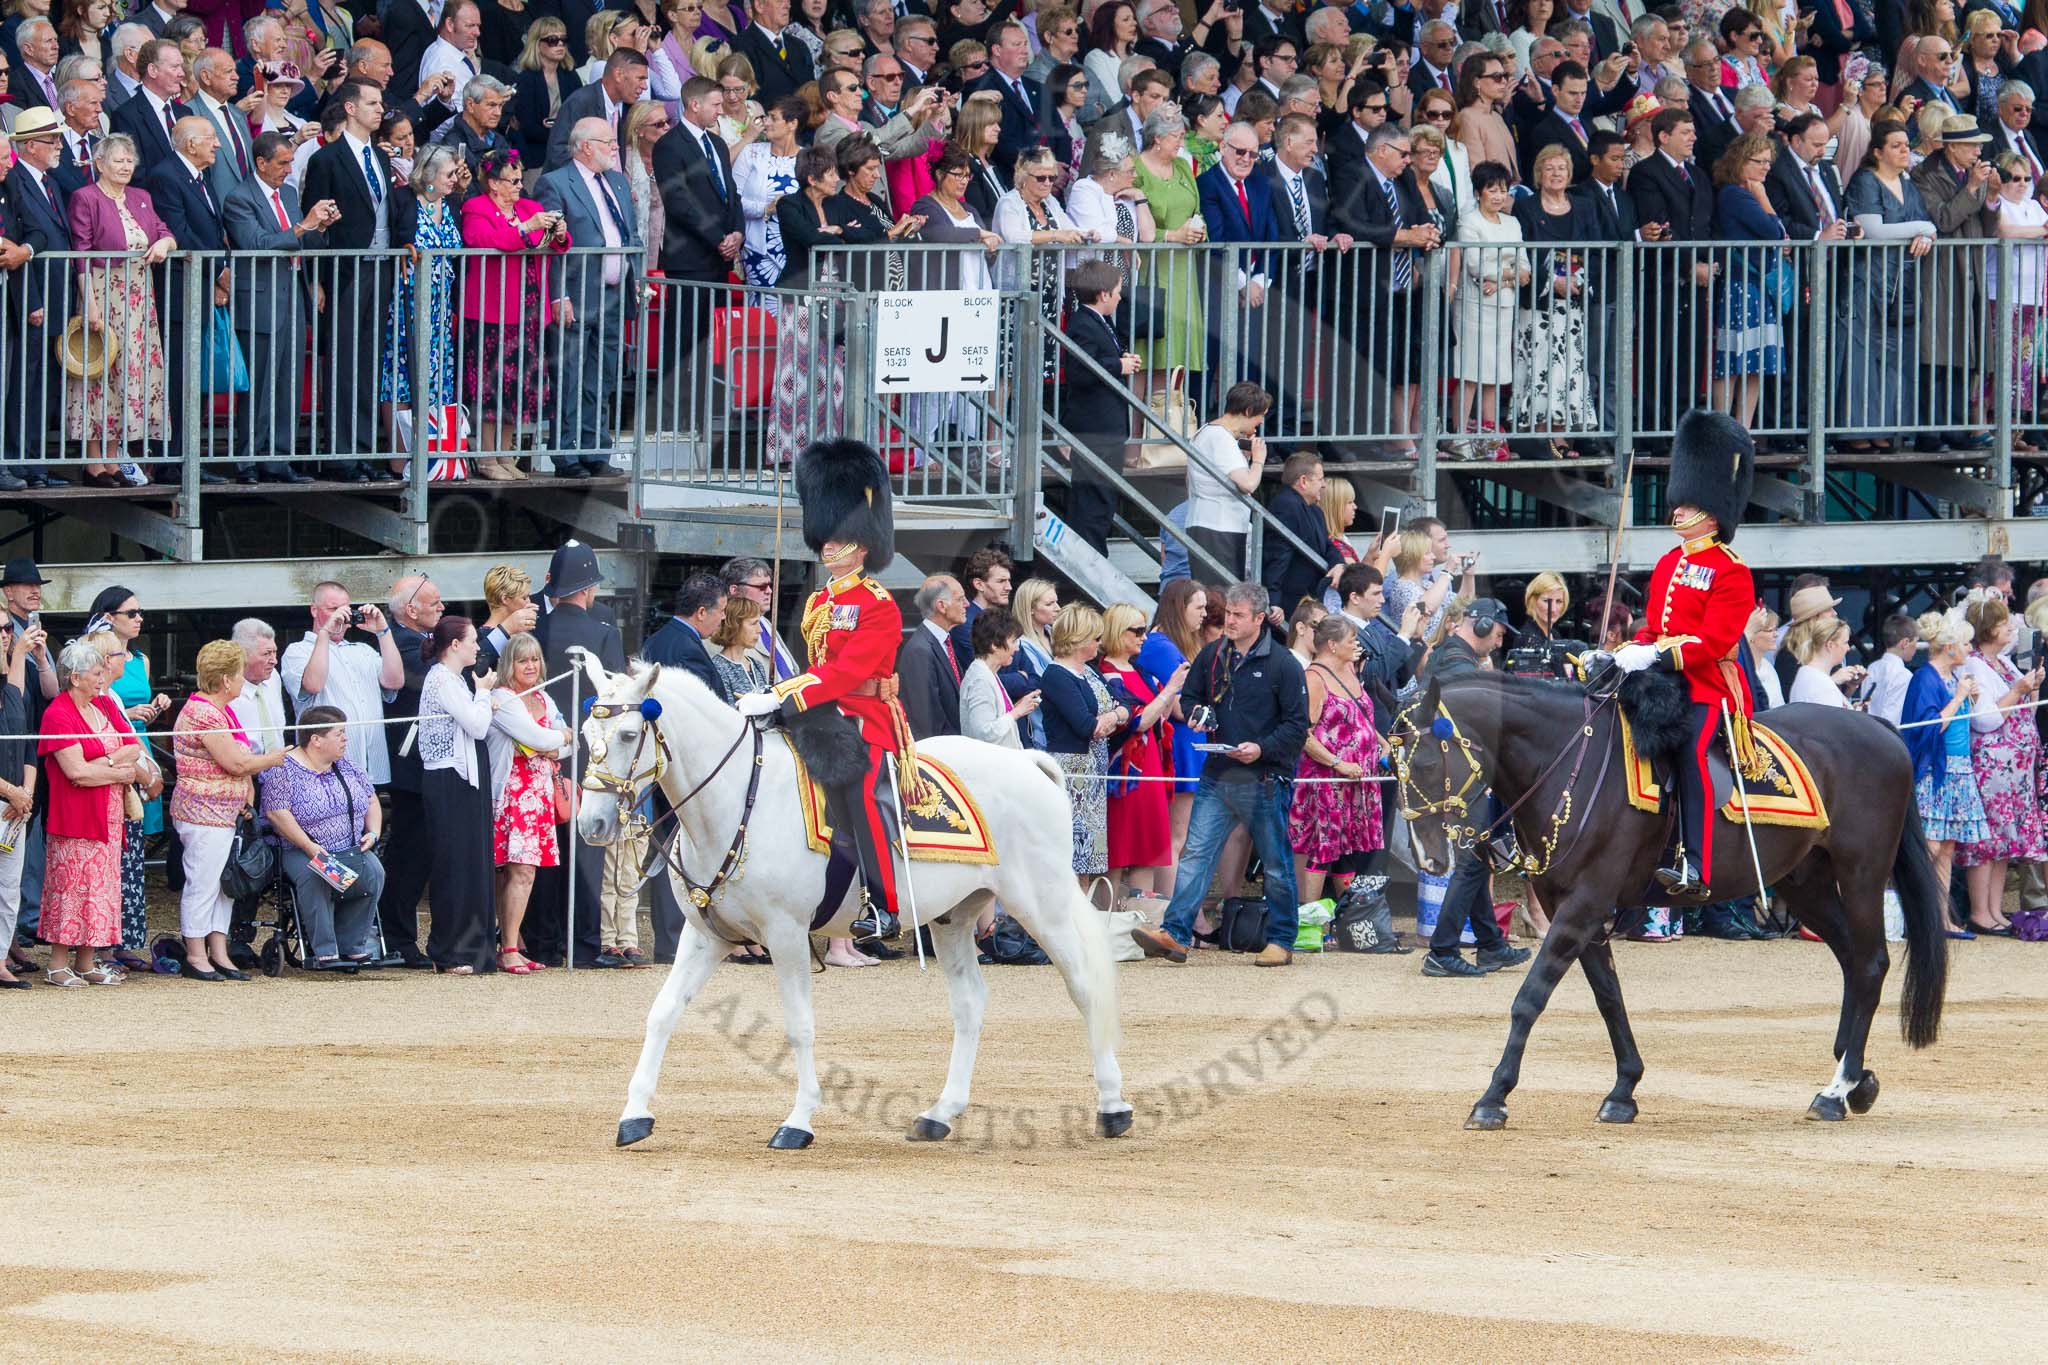 Trooping the Colour 2014.
Horse Guards Parade, Westminster,
London SW1A,

United Kingdom,
on 14 June 2014 at 11:35, image #603